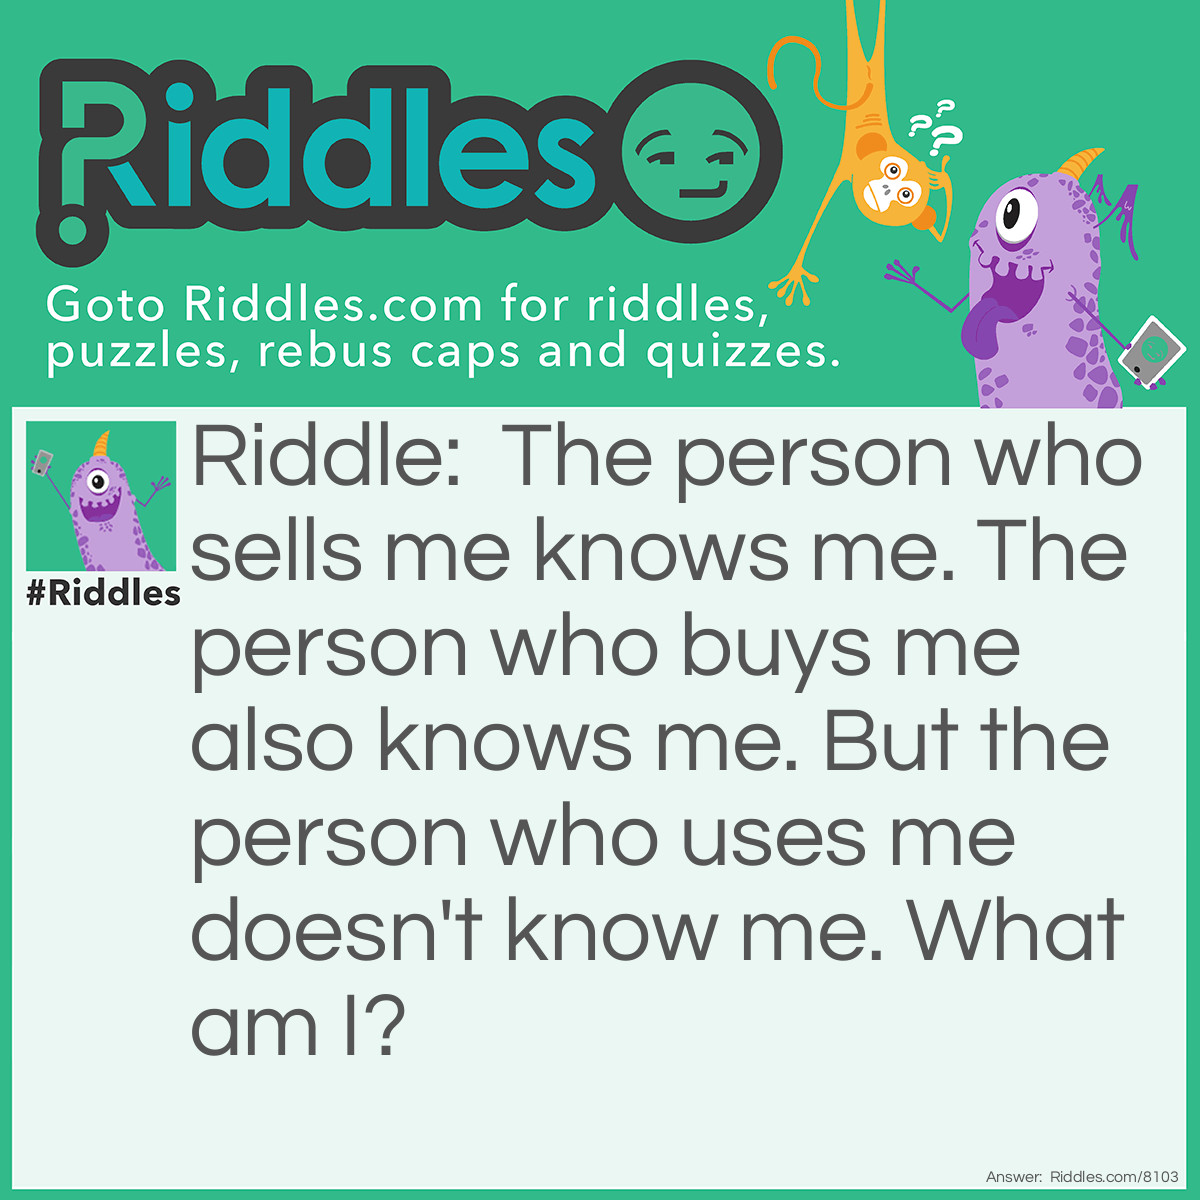 Riddle: The person who sells me knows me. The person who buys me also knows me. But the person who uses me doesn't know me. What am I? Answer: A coffin.